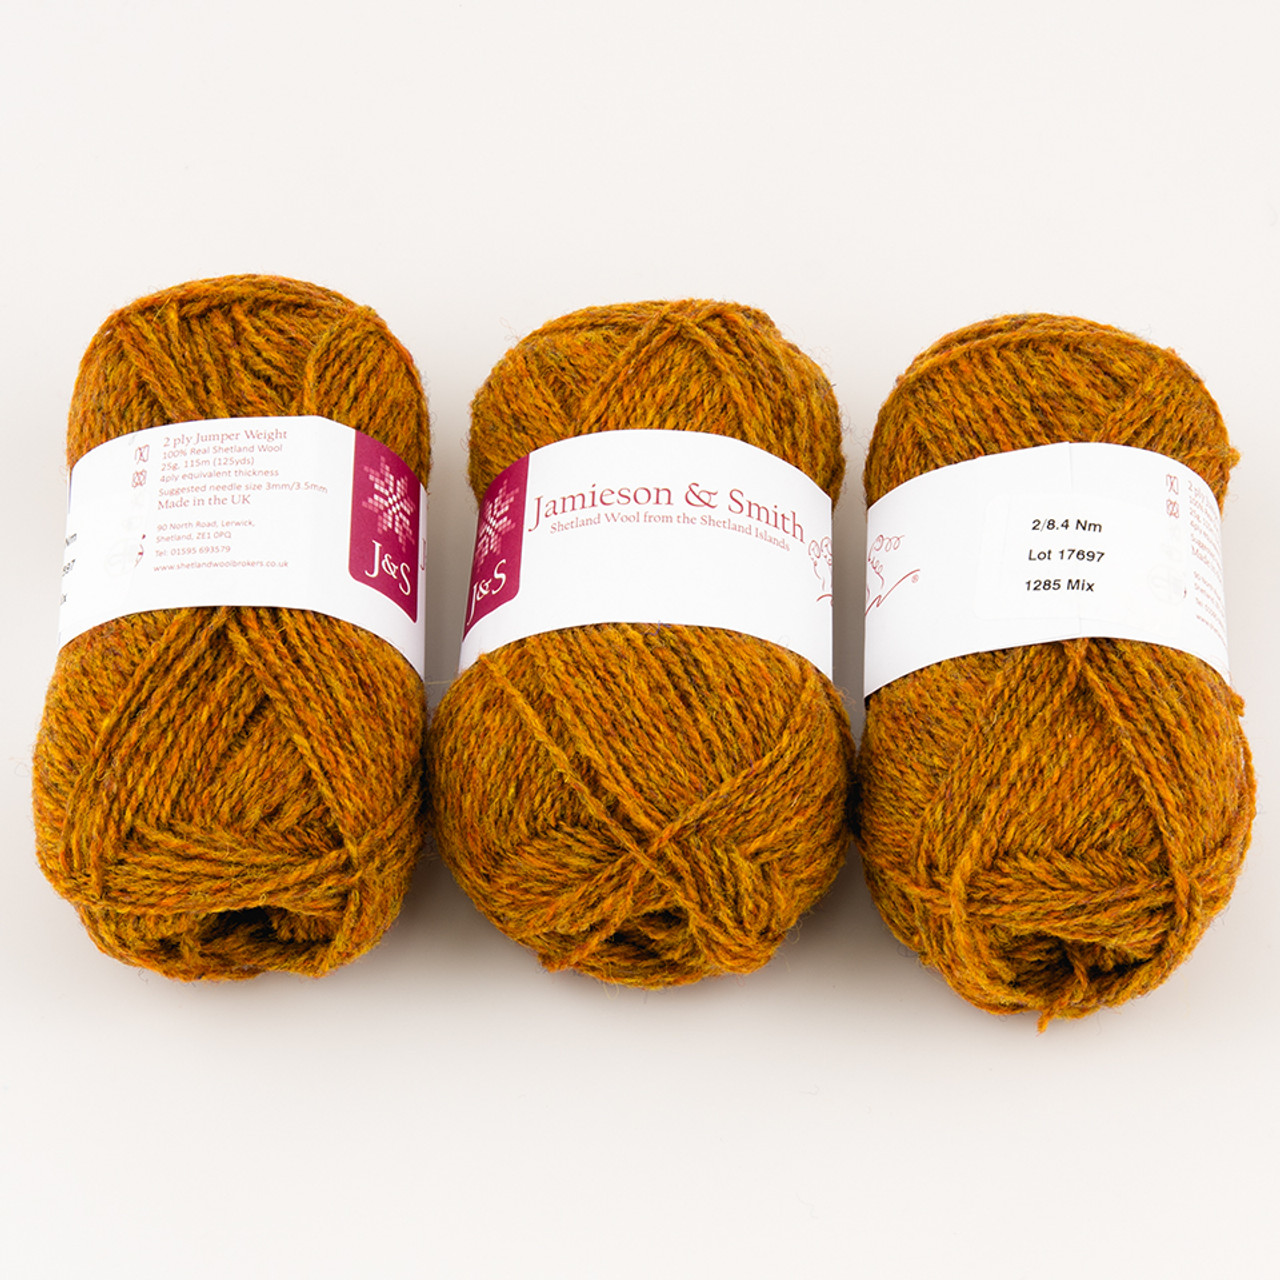 Jamieson & Smith, 2ply Jumper Weight // 1285 Mix at The Loopy Ewe